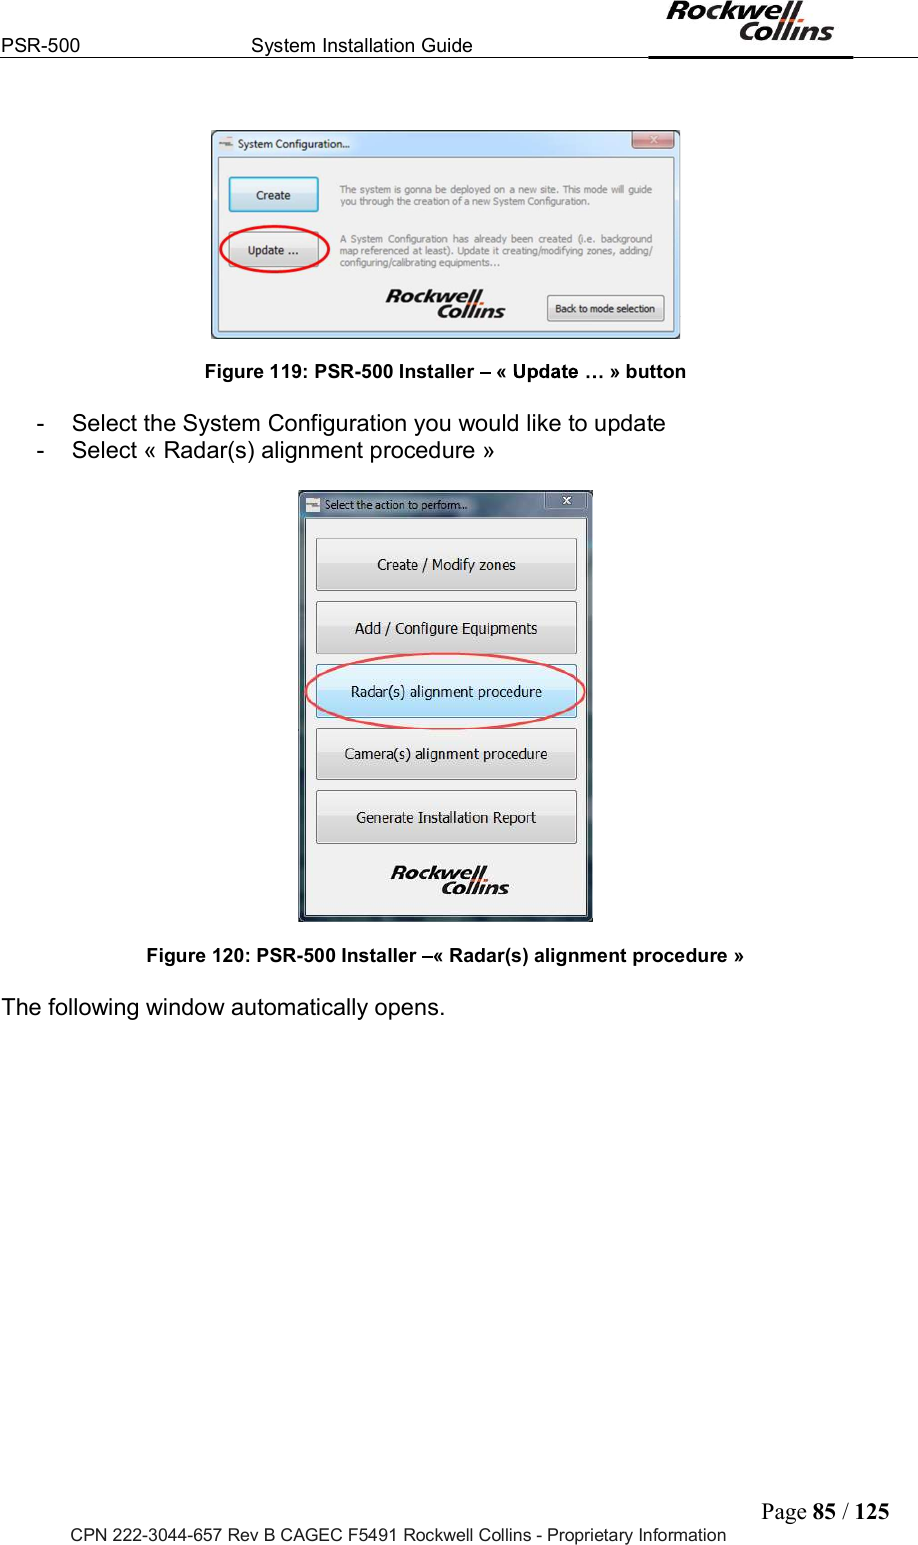 PSR-500  System Installation Guide  Page 85 / 125 CPN 222-3044-657 Rev B CAGEC F5491 Rockwell Collins - Proprietary Information    Figure 119: PSR-500 Installer   «   » button  -  Select the System Configuration you would like to update -  Select « Radar(s) alignment procedure »    Figure 120: PSR-500 Installer  « Radar(s) alignment procedure »  The following window automatically opens.  